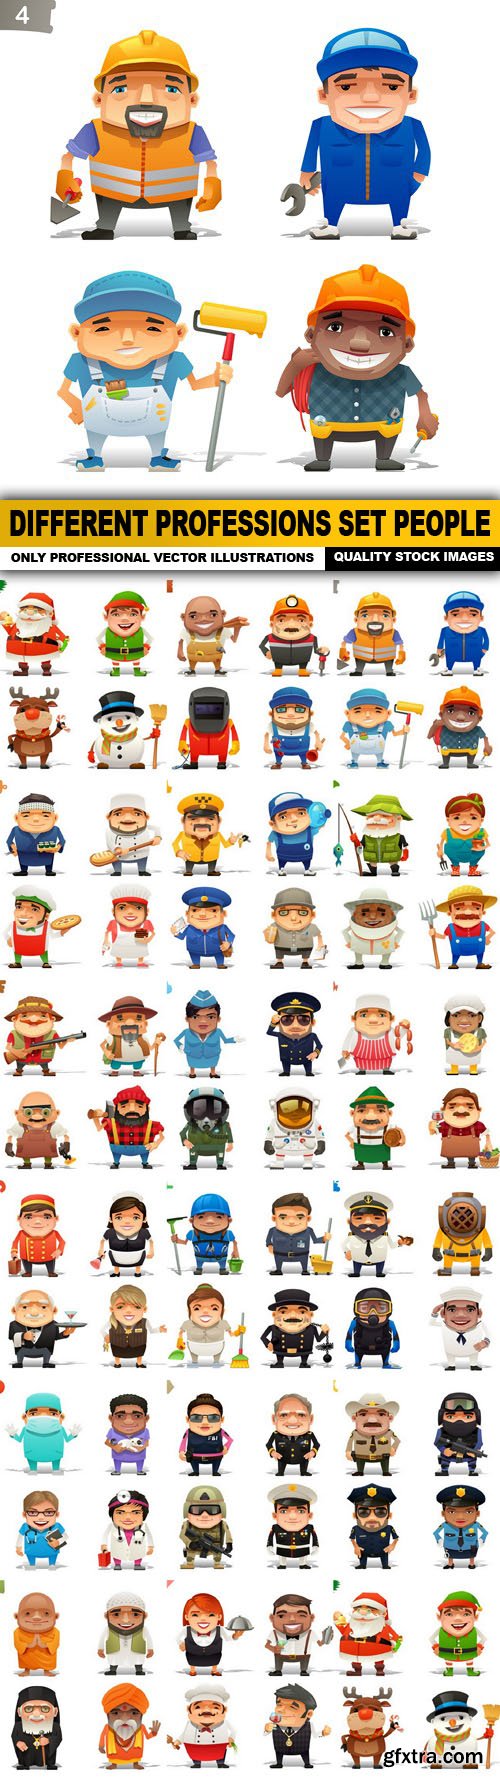 Different Professions Set People - 17 Vector